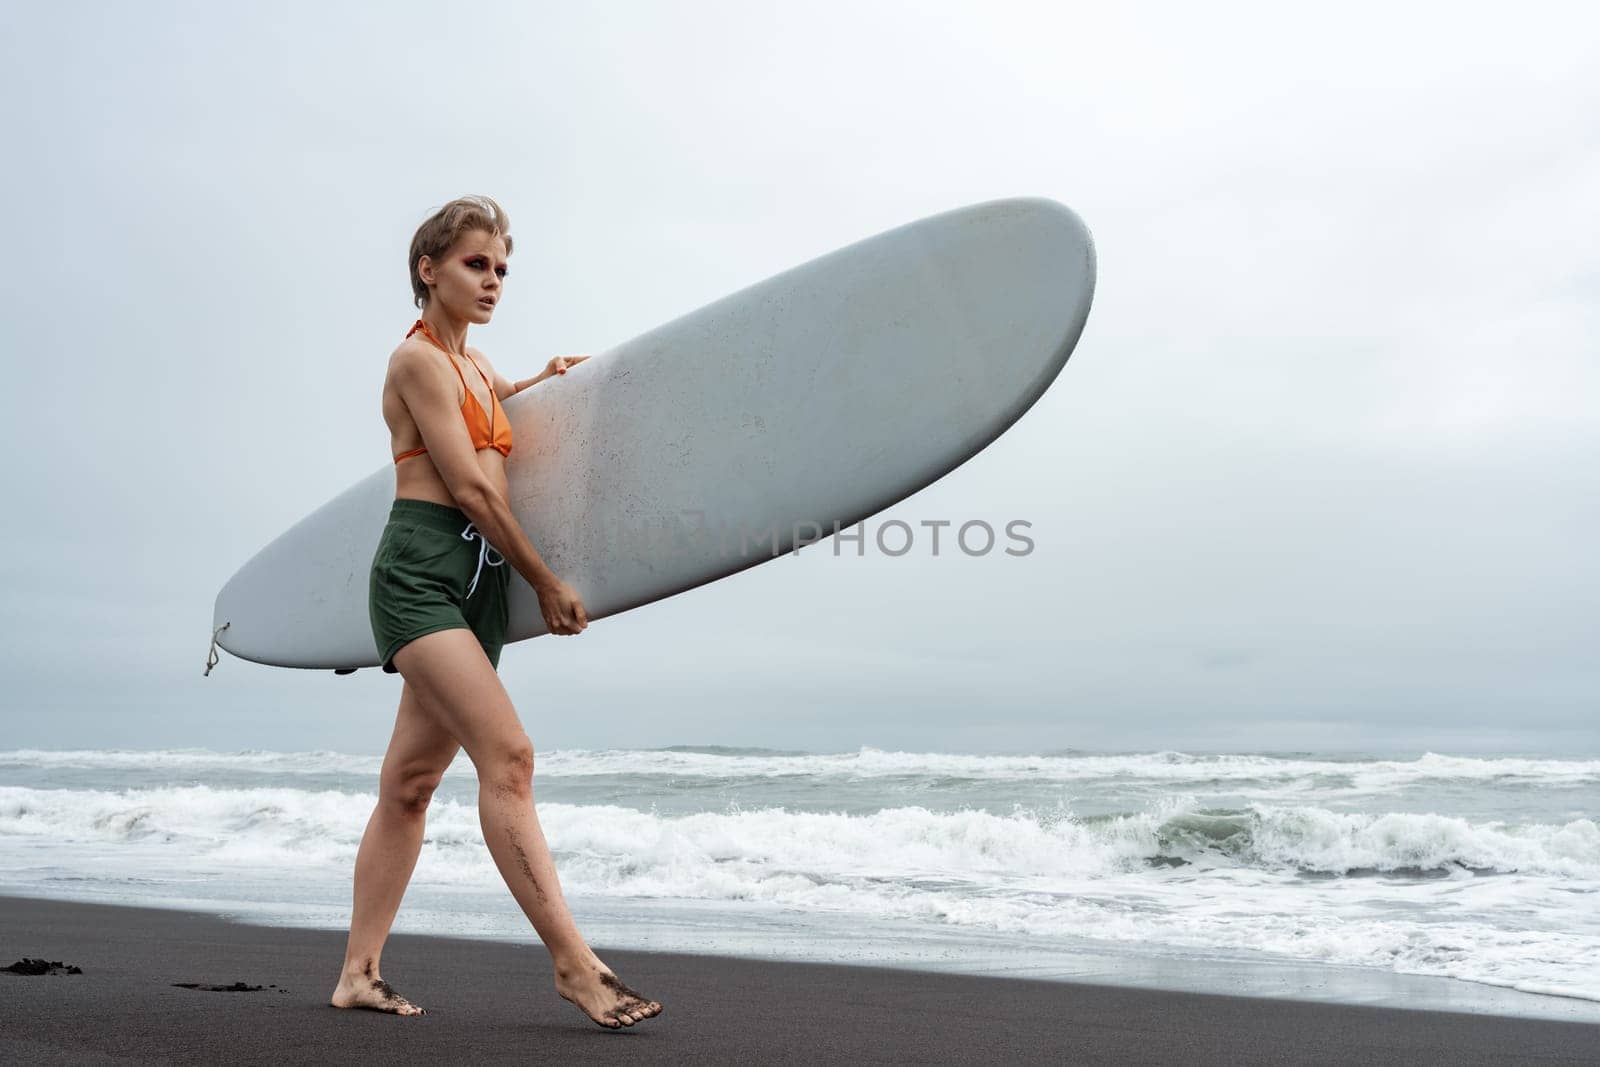 Sporty surfer is walking barefoot on black sand beach during summer holiday, carrying white surfboard against background of sea waves. Female sportswoman wearing bikini top, shorts and barefoot